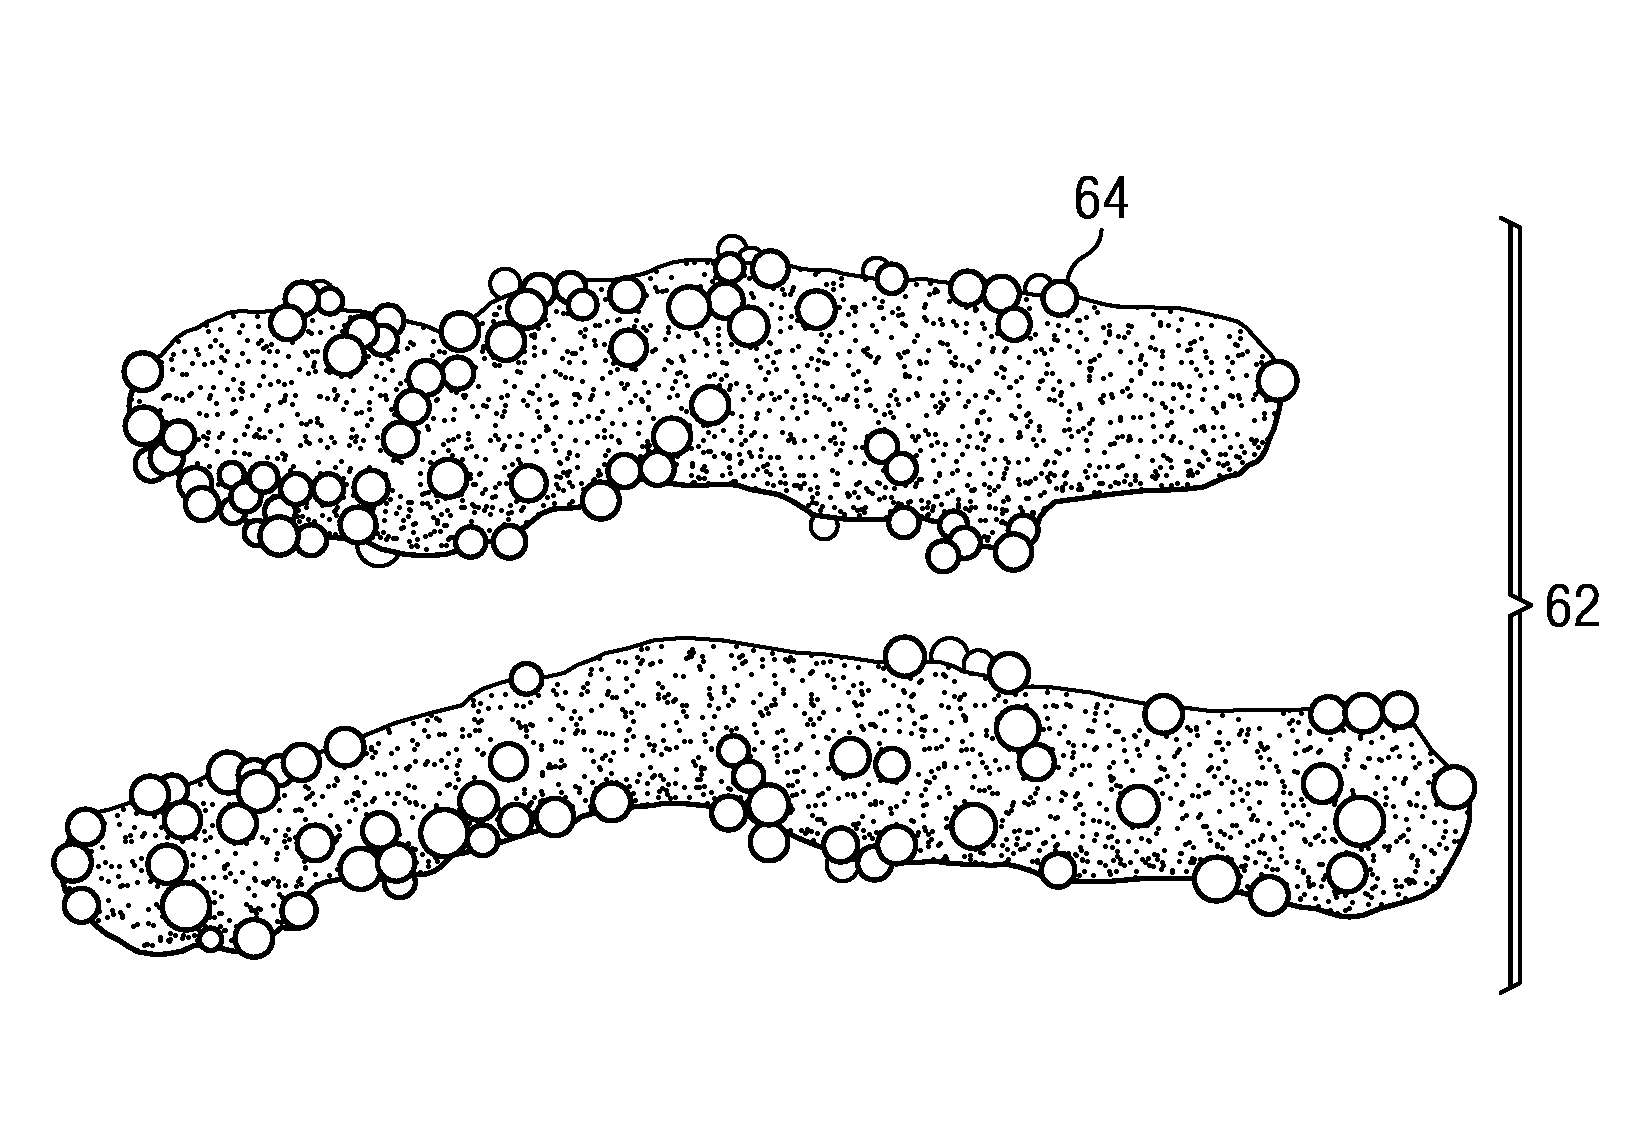 Micropellets of Fine Particle Nutrients and Methods of Incorporating Same into Snack Food Products